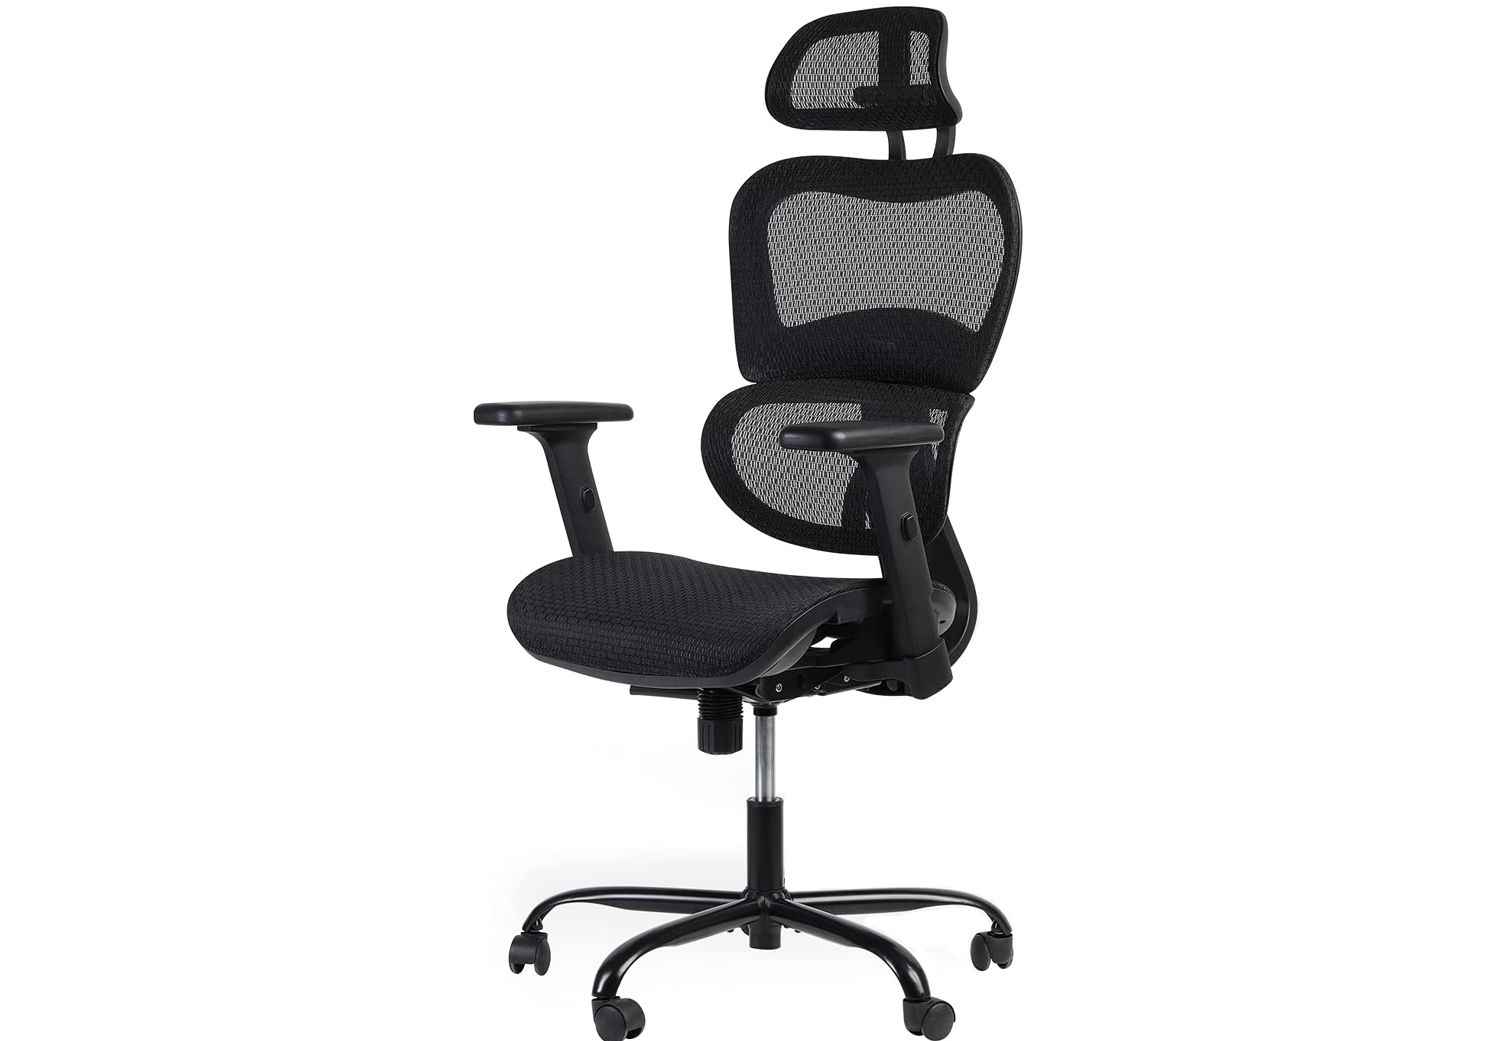 The NetDigz Editors rate the Oline ErgoPro as the Best Desk Chair for the money.